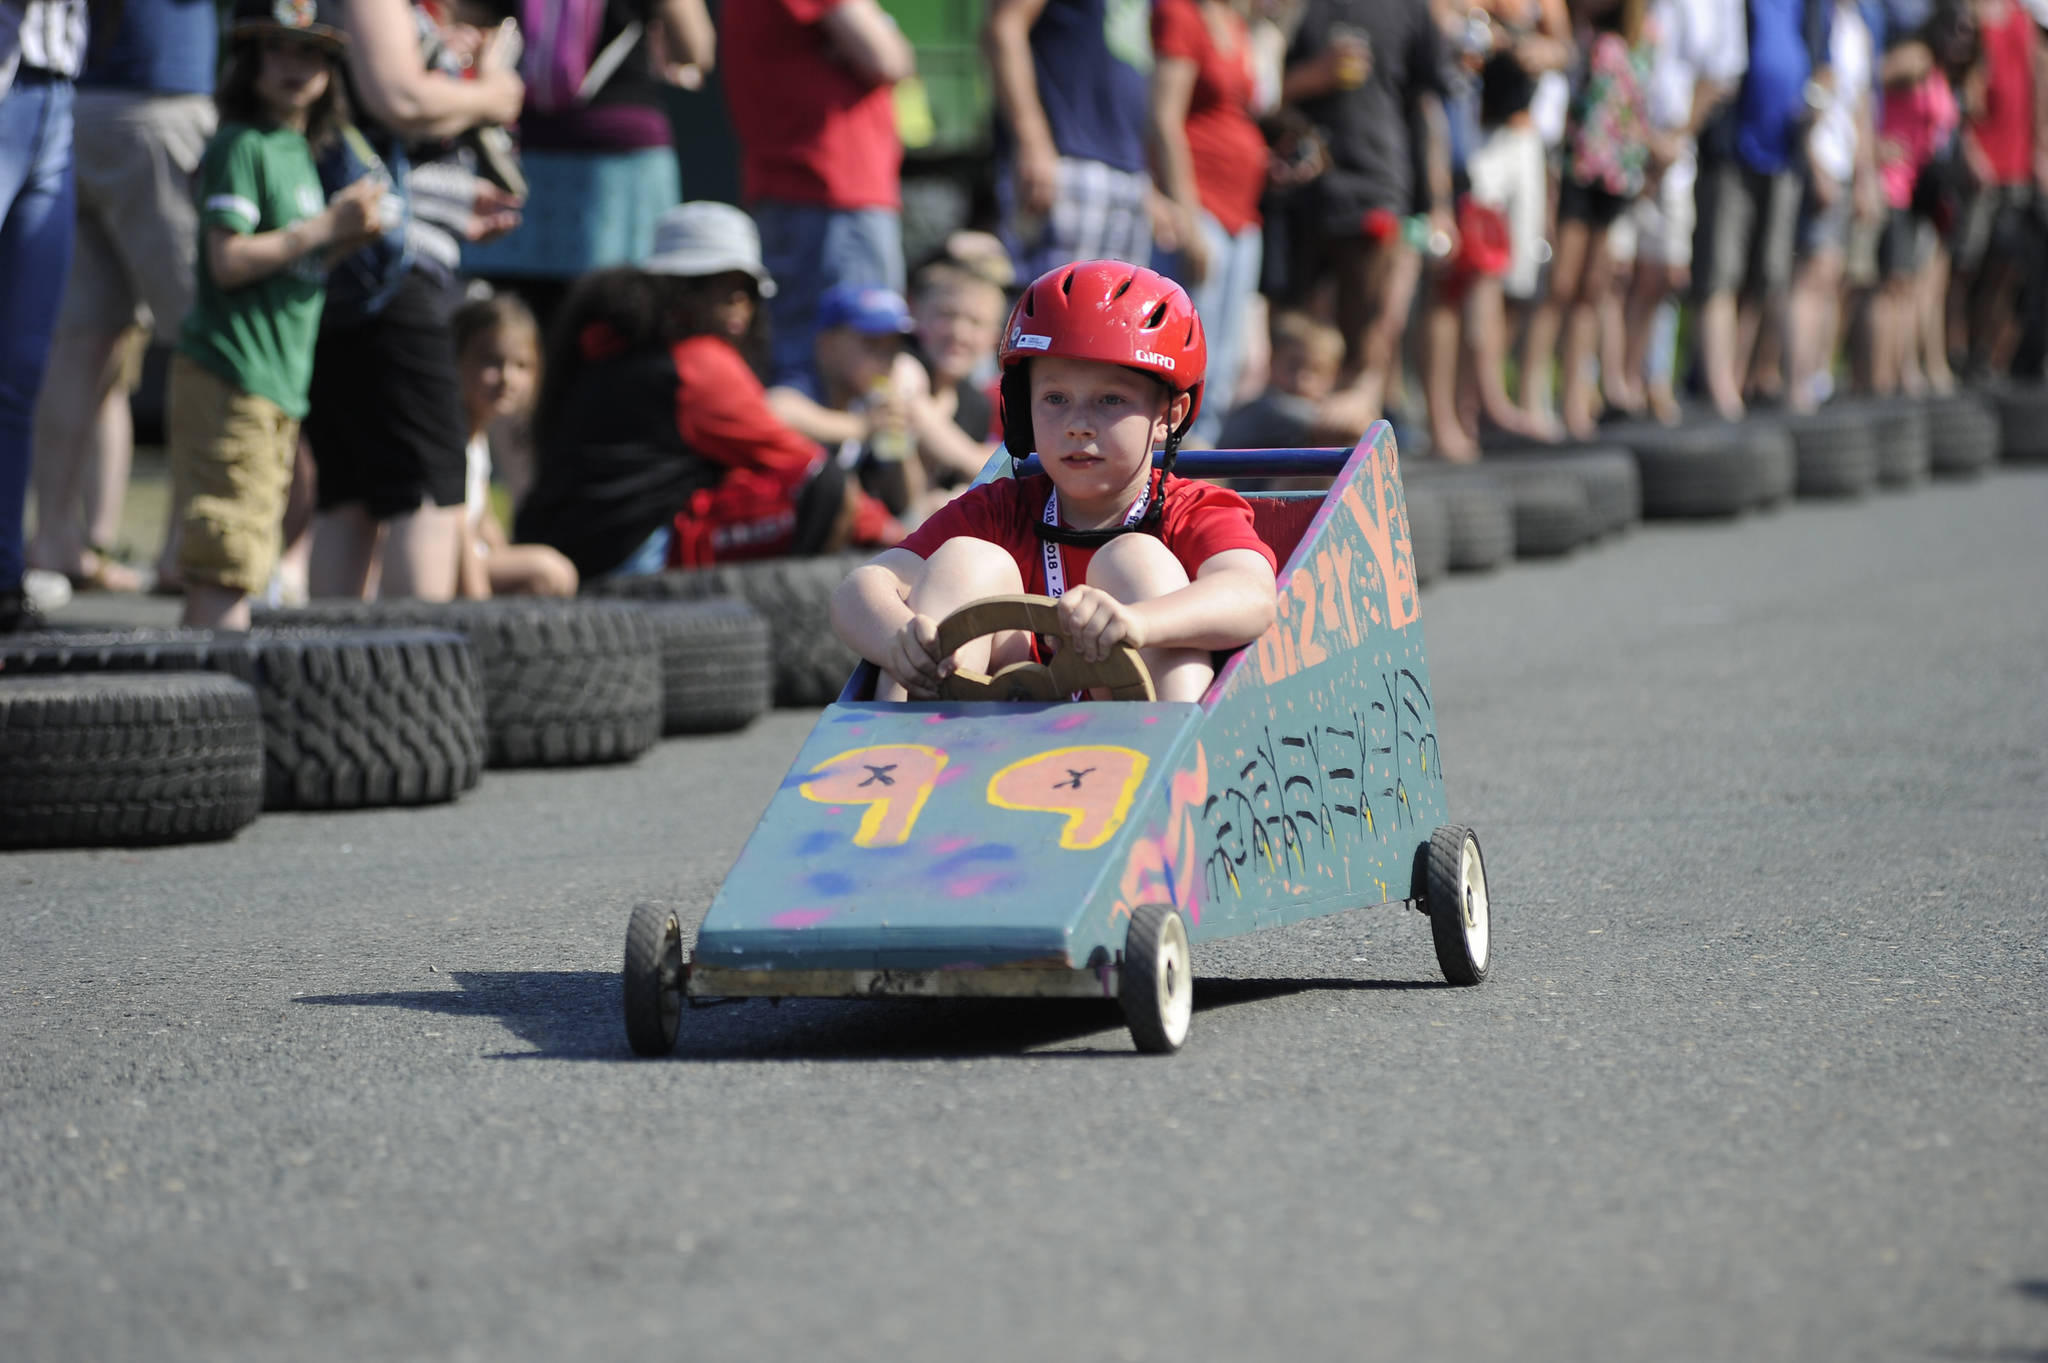 Aaron Hull, 9, races in the Soapbox Challenge down St. Ann’s Avenue on Wednesday. (Nolin Ainsworth | Juneau Empire)